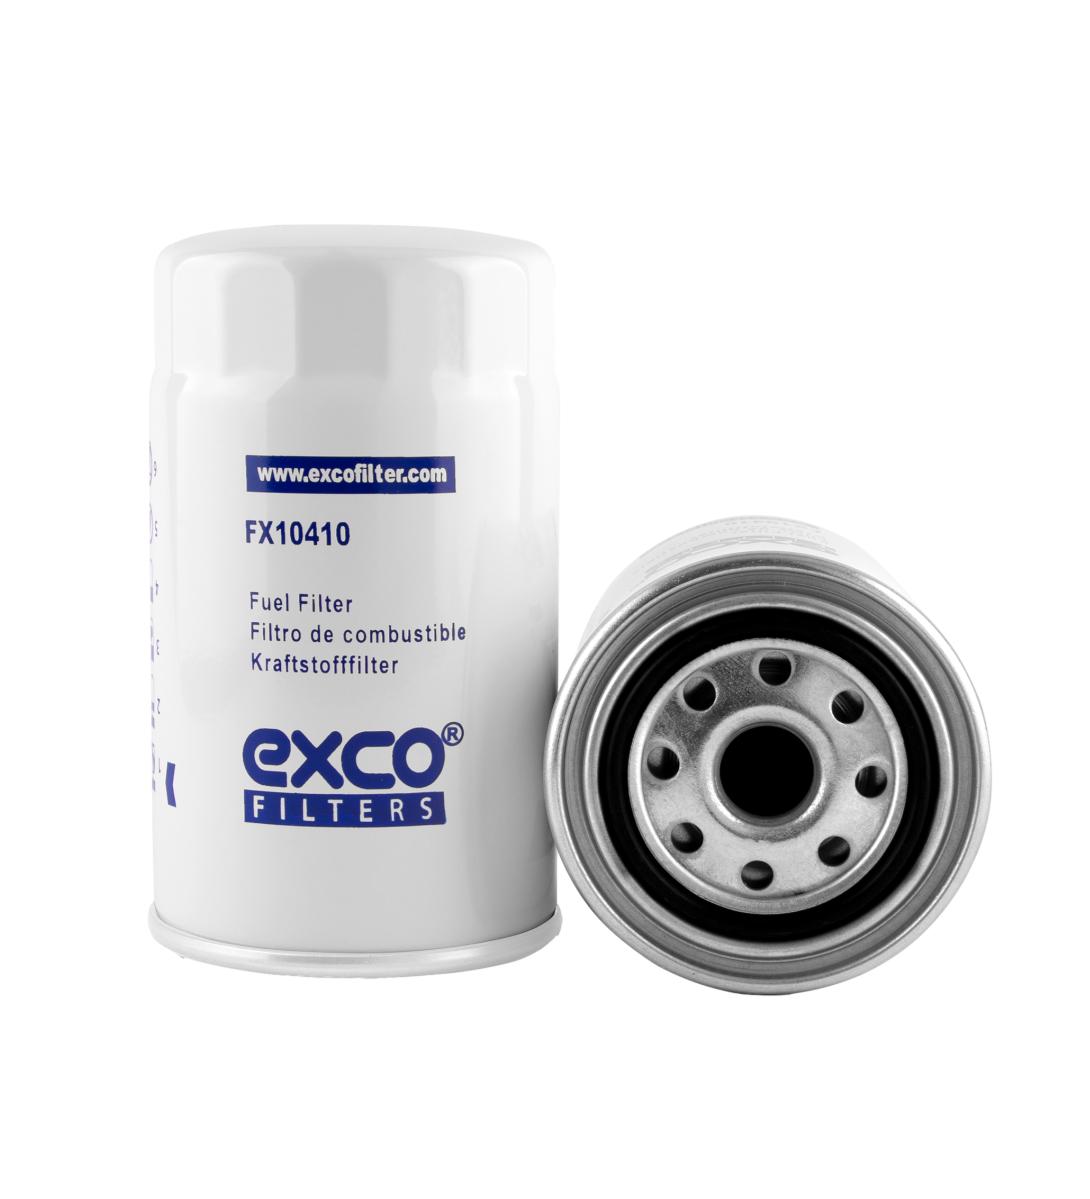 
                        
                                                                                                                HAS FF859 FUEL FILTER CROSS REFERENCE
                                                                            
                            